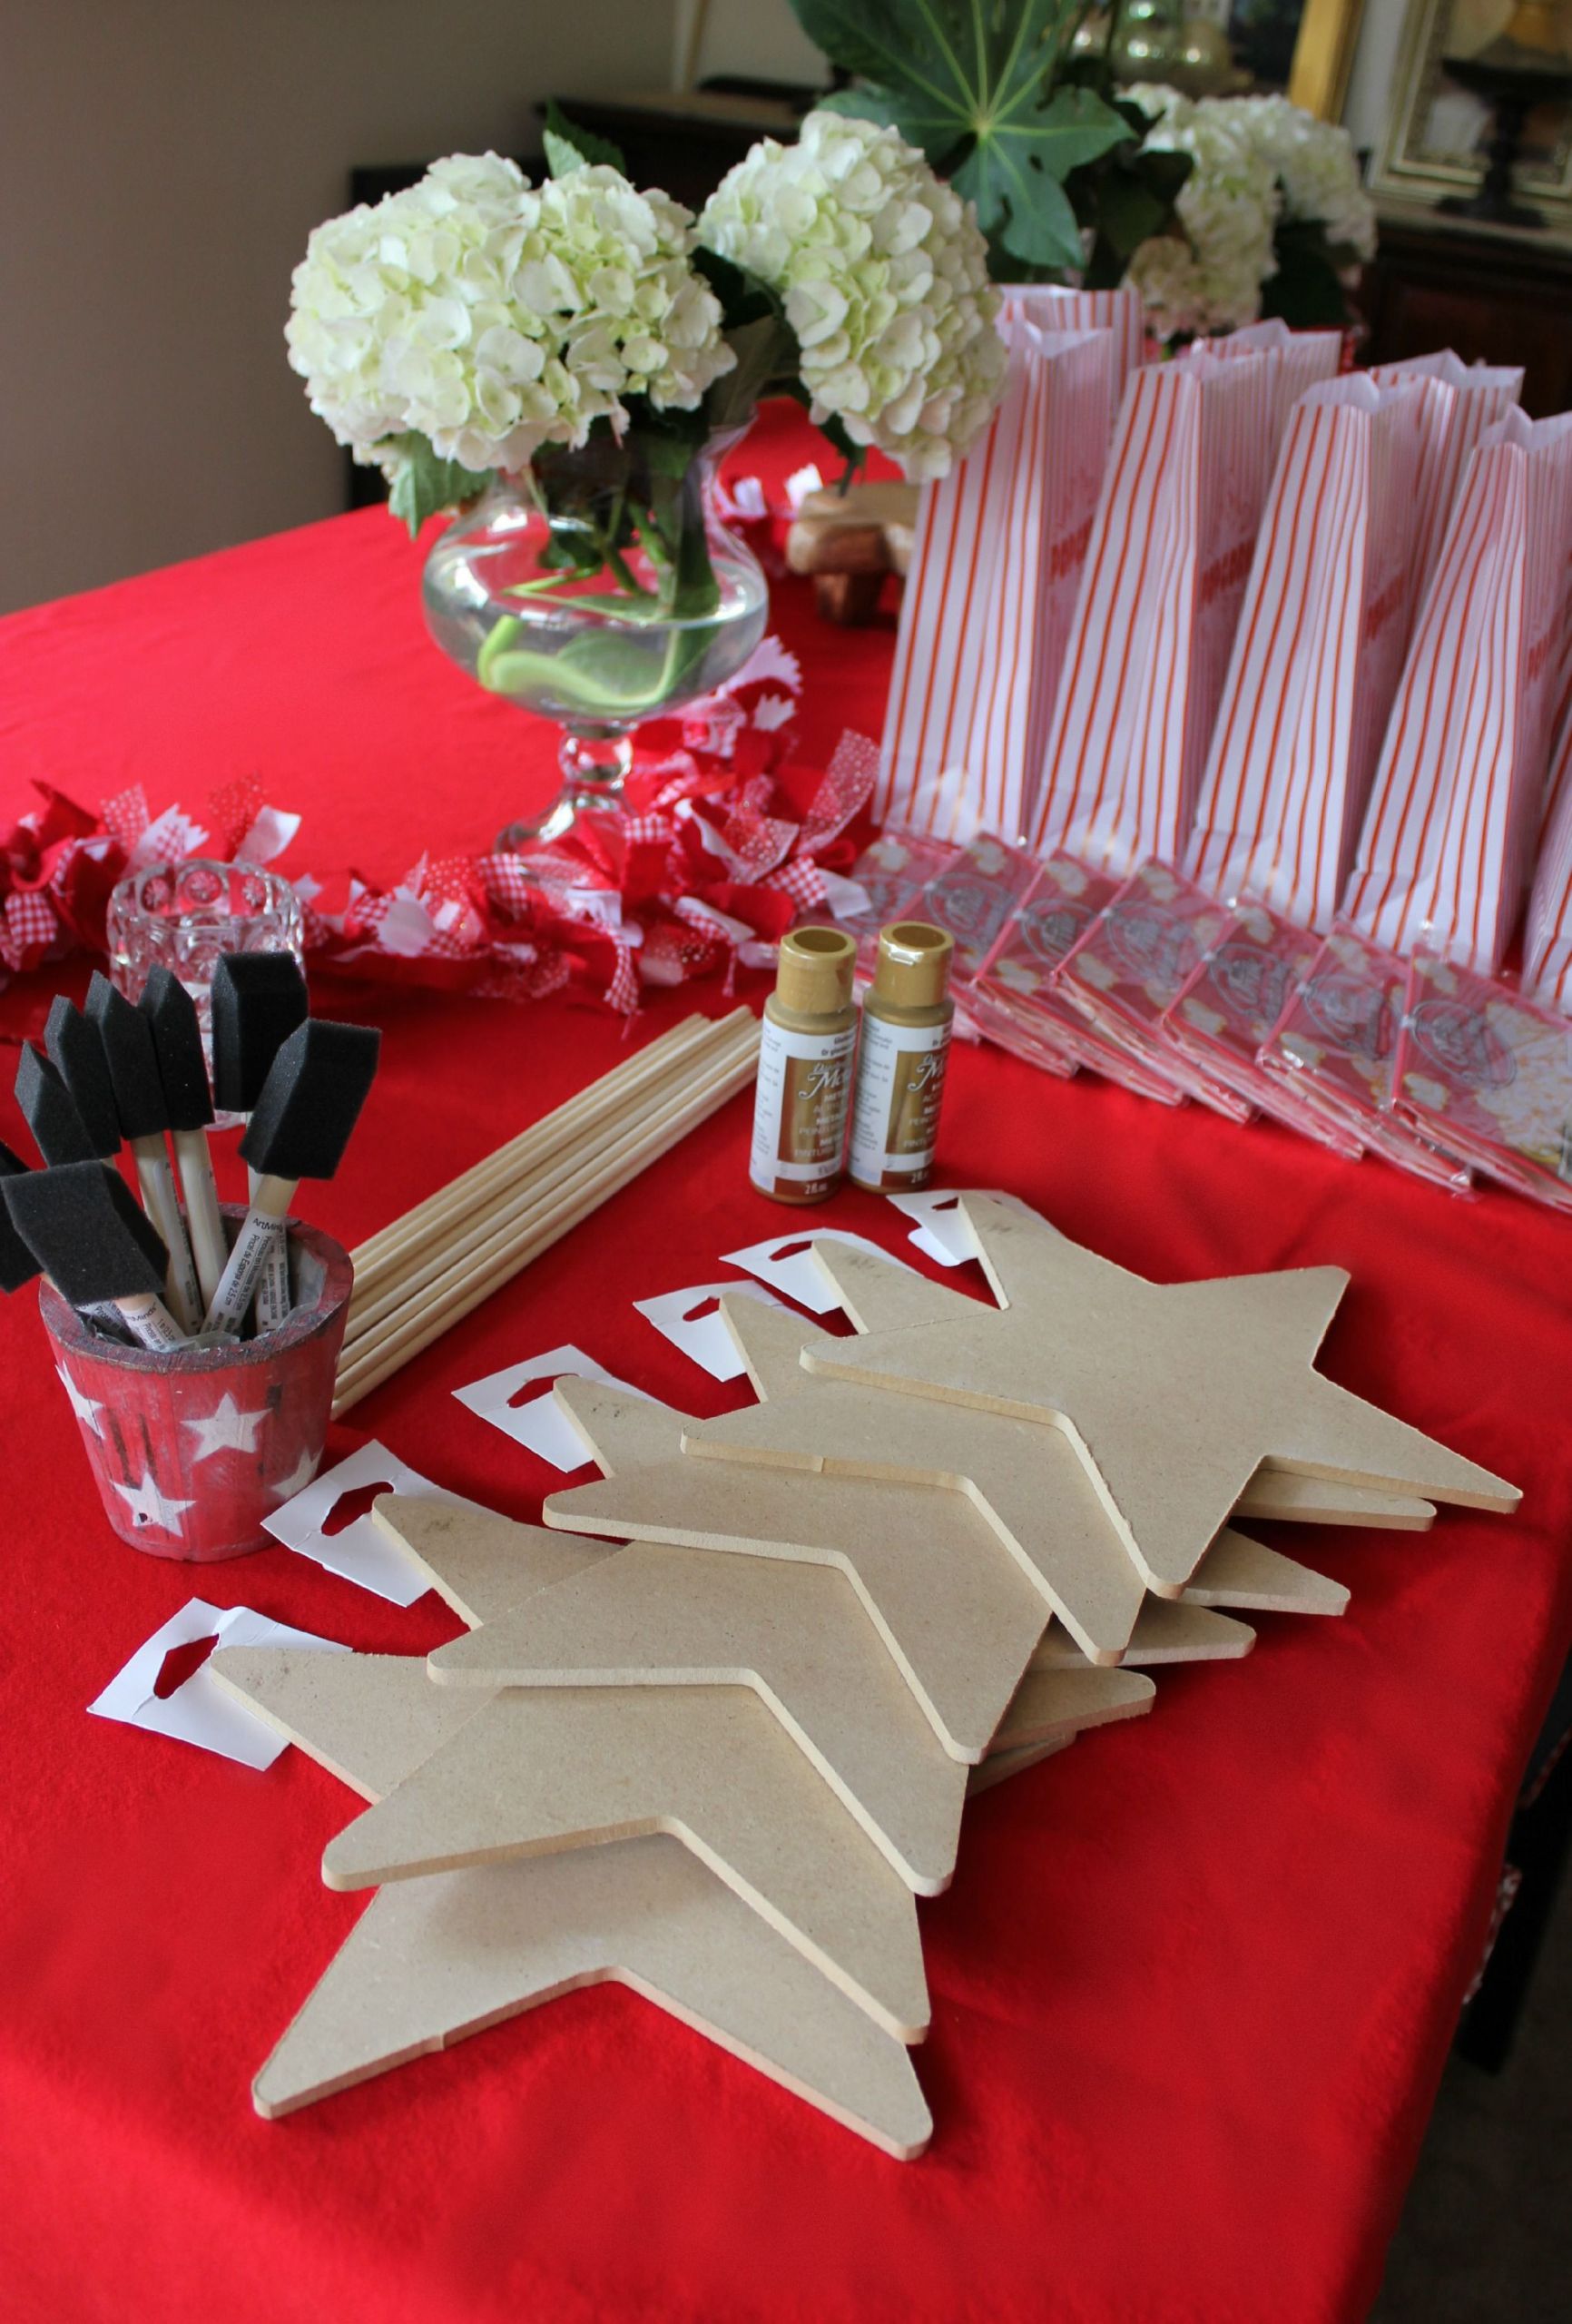 Kids Hollywood Party
 "Hollywood Walk of Fame" star craft station for movie